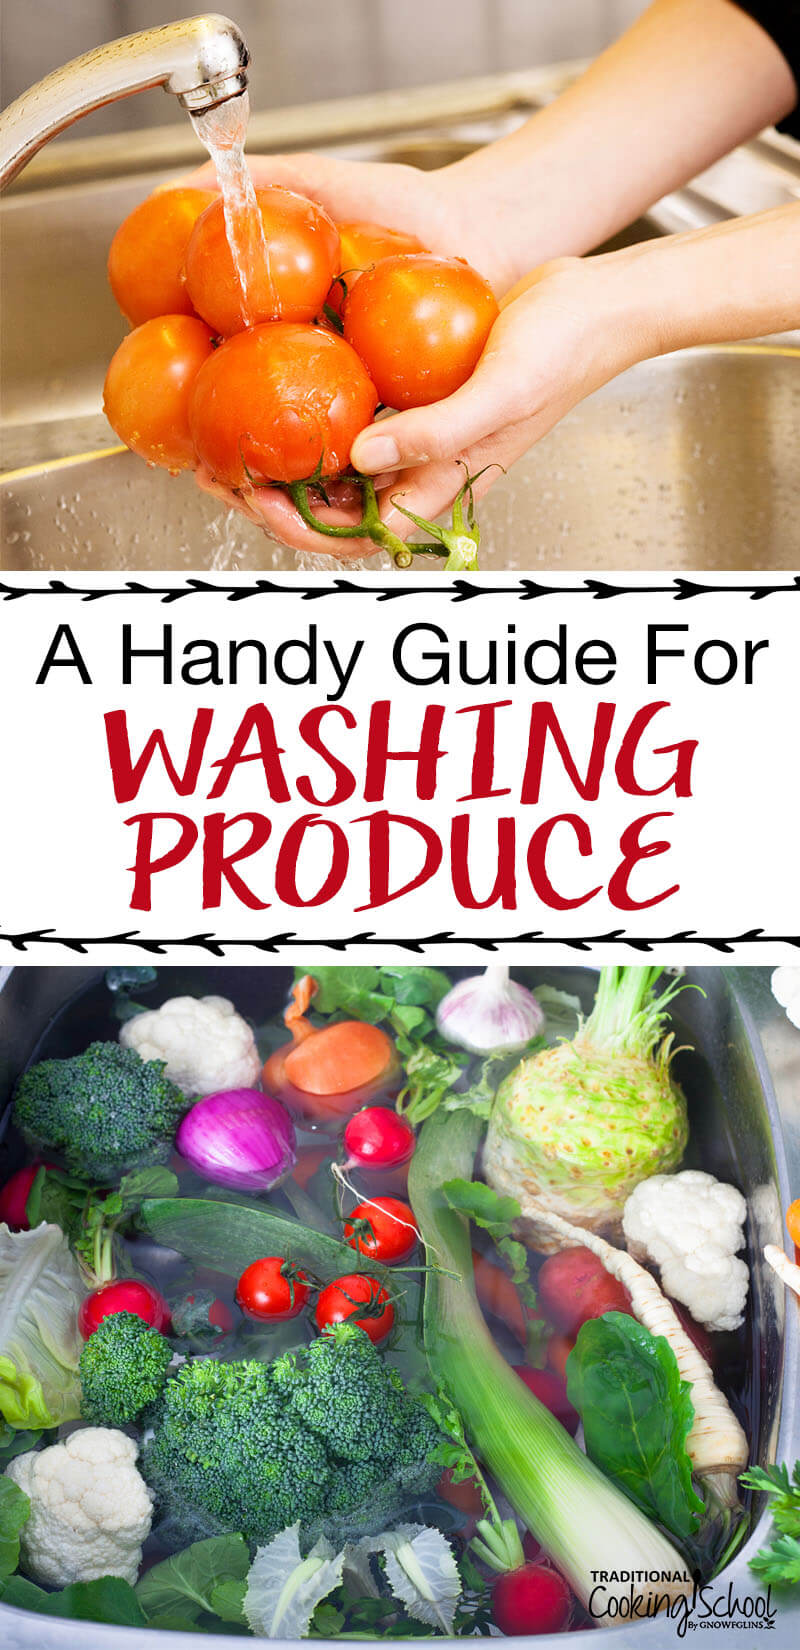 A Handy Guide For Washing Produce | The beginning of spring is the perfect to time to talk about preserving produce. I don't mean recipes, canning, or lacto-fermentation, though. I want to talk about the first thing you do to produce once you bring it home. Let's talk about the best ways to wash produce! | TraditionalCookingSchool.com